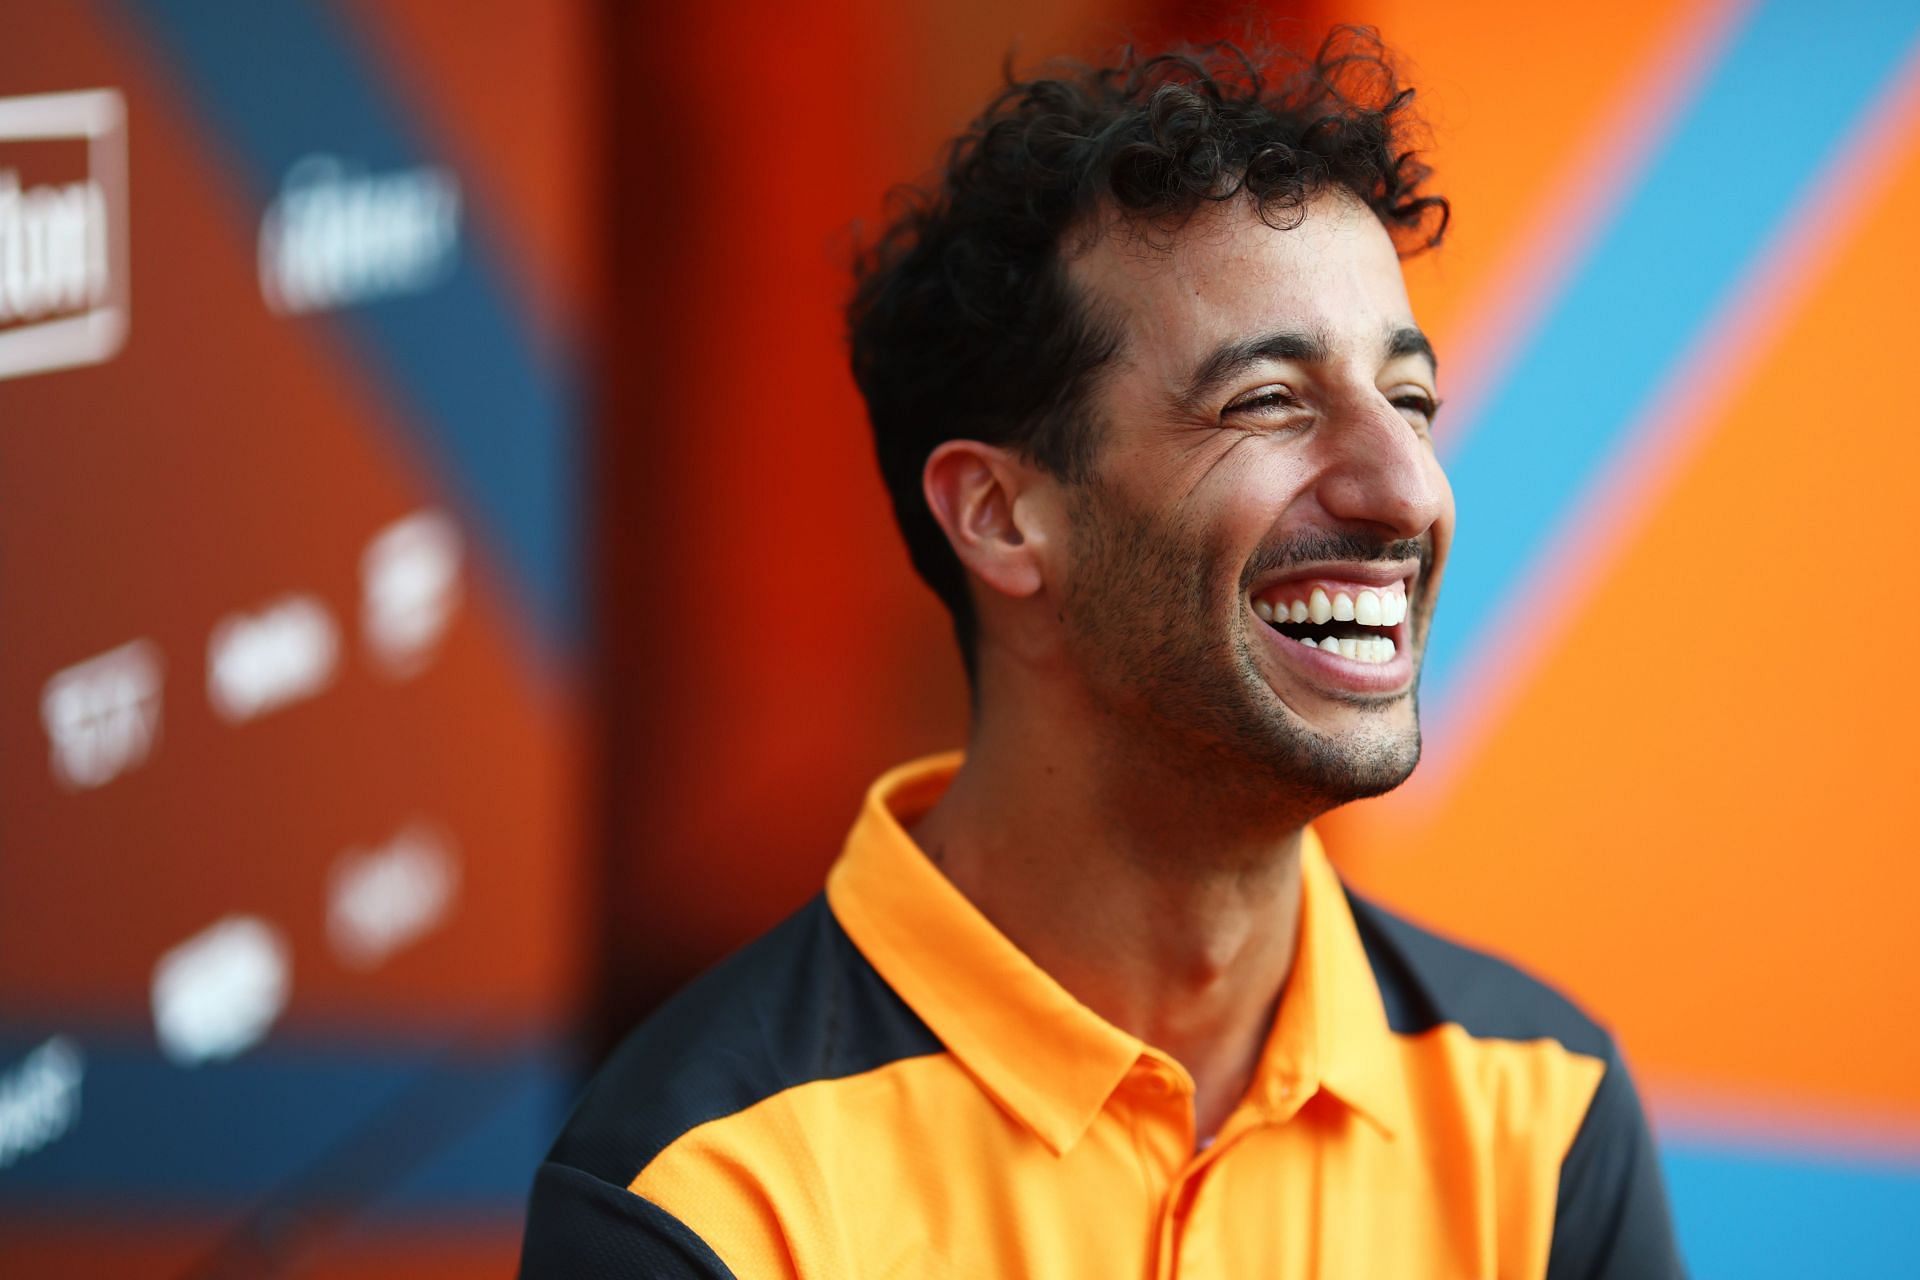 Ricciardo was spotted playing golf with tennis player Ashleigh Barty